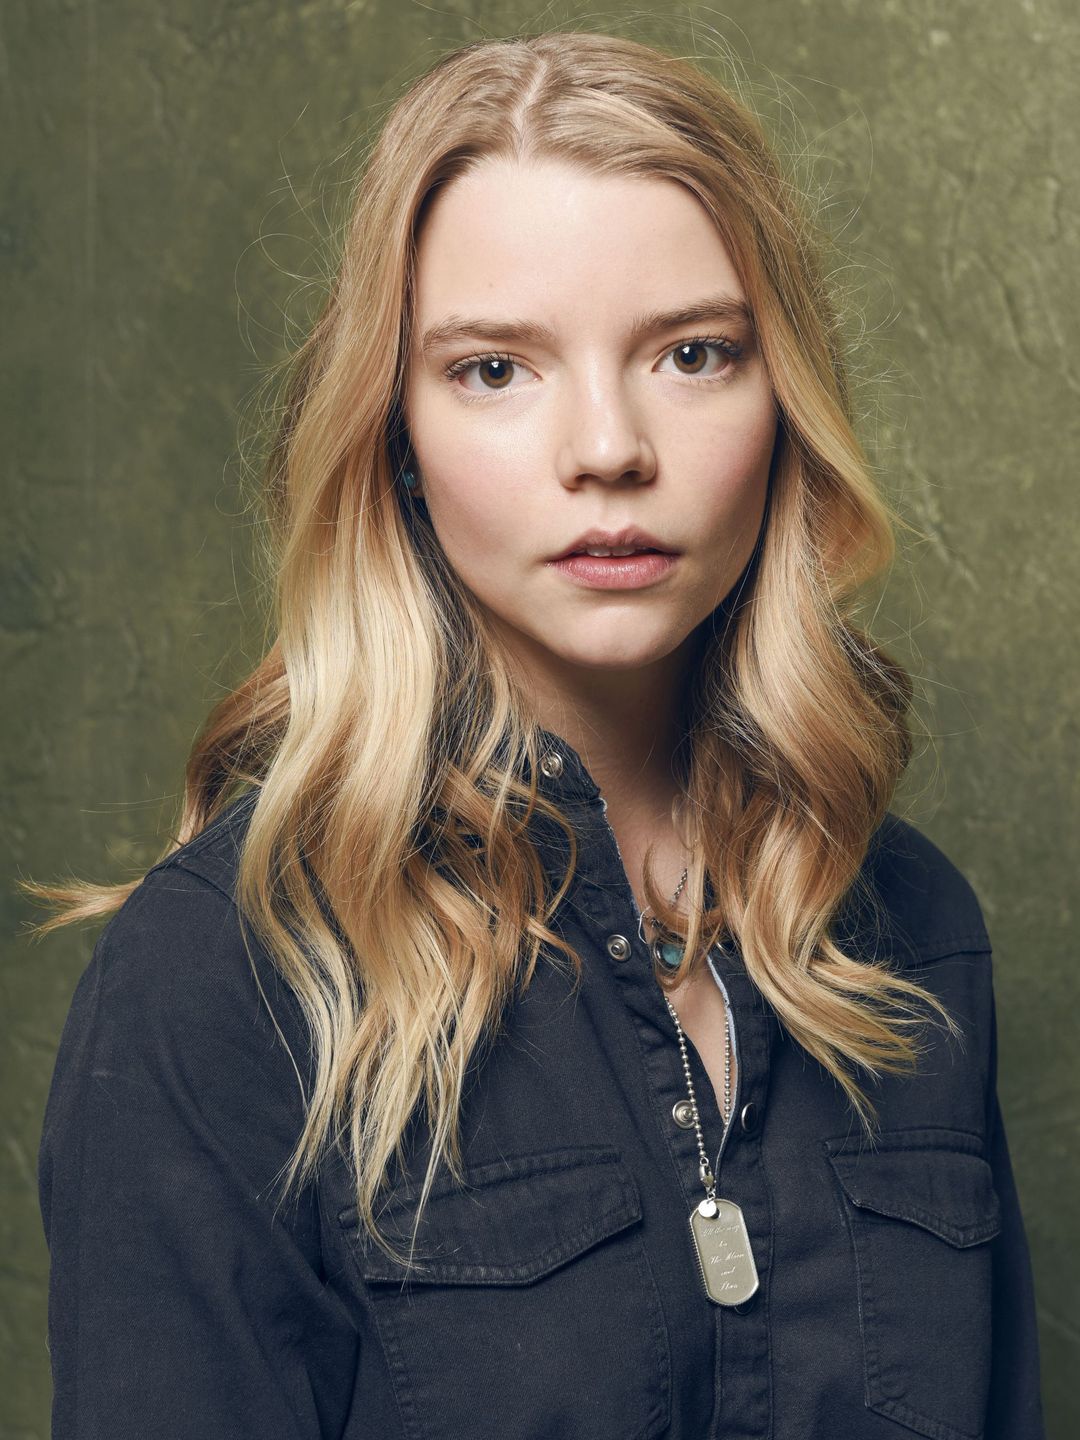 Anya Taylor-Joy who is her mother